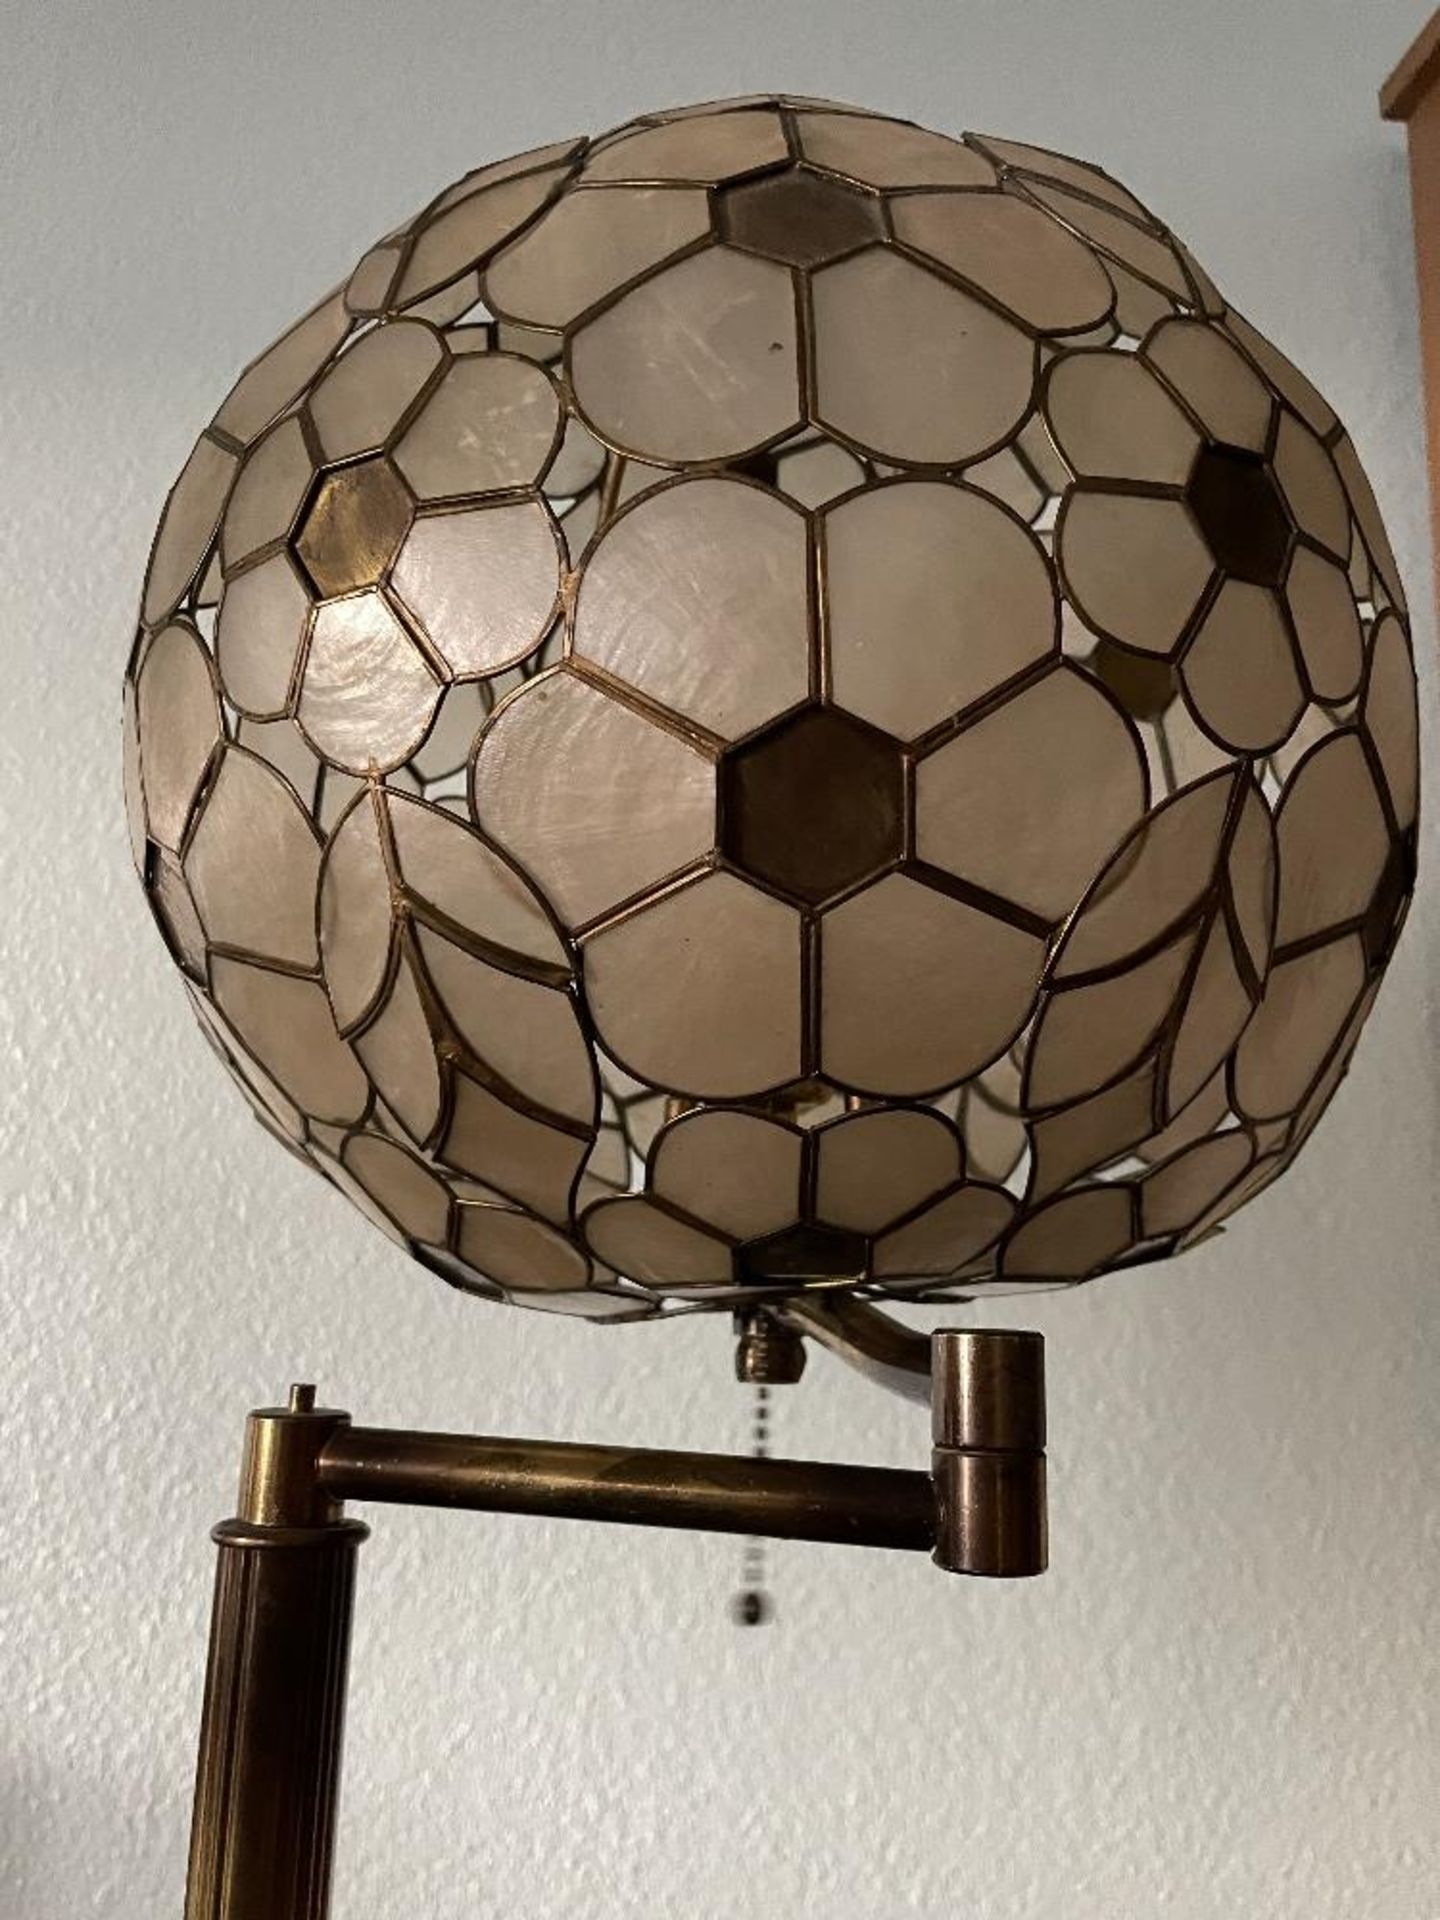 Antique Tortoise Shell Lamp in Brass Finish, approx 5' Tall. Very Rare/Unique. - Image 7 of 11